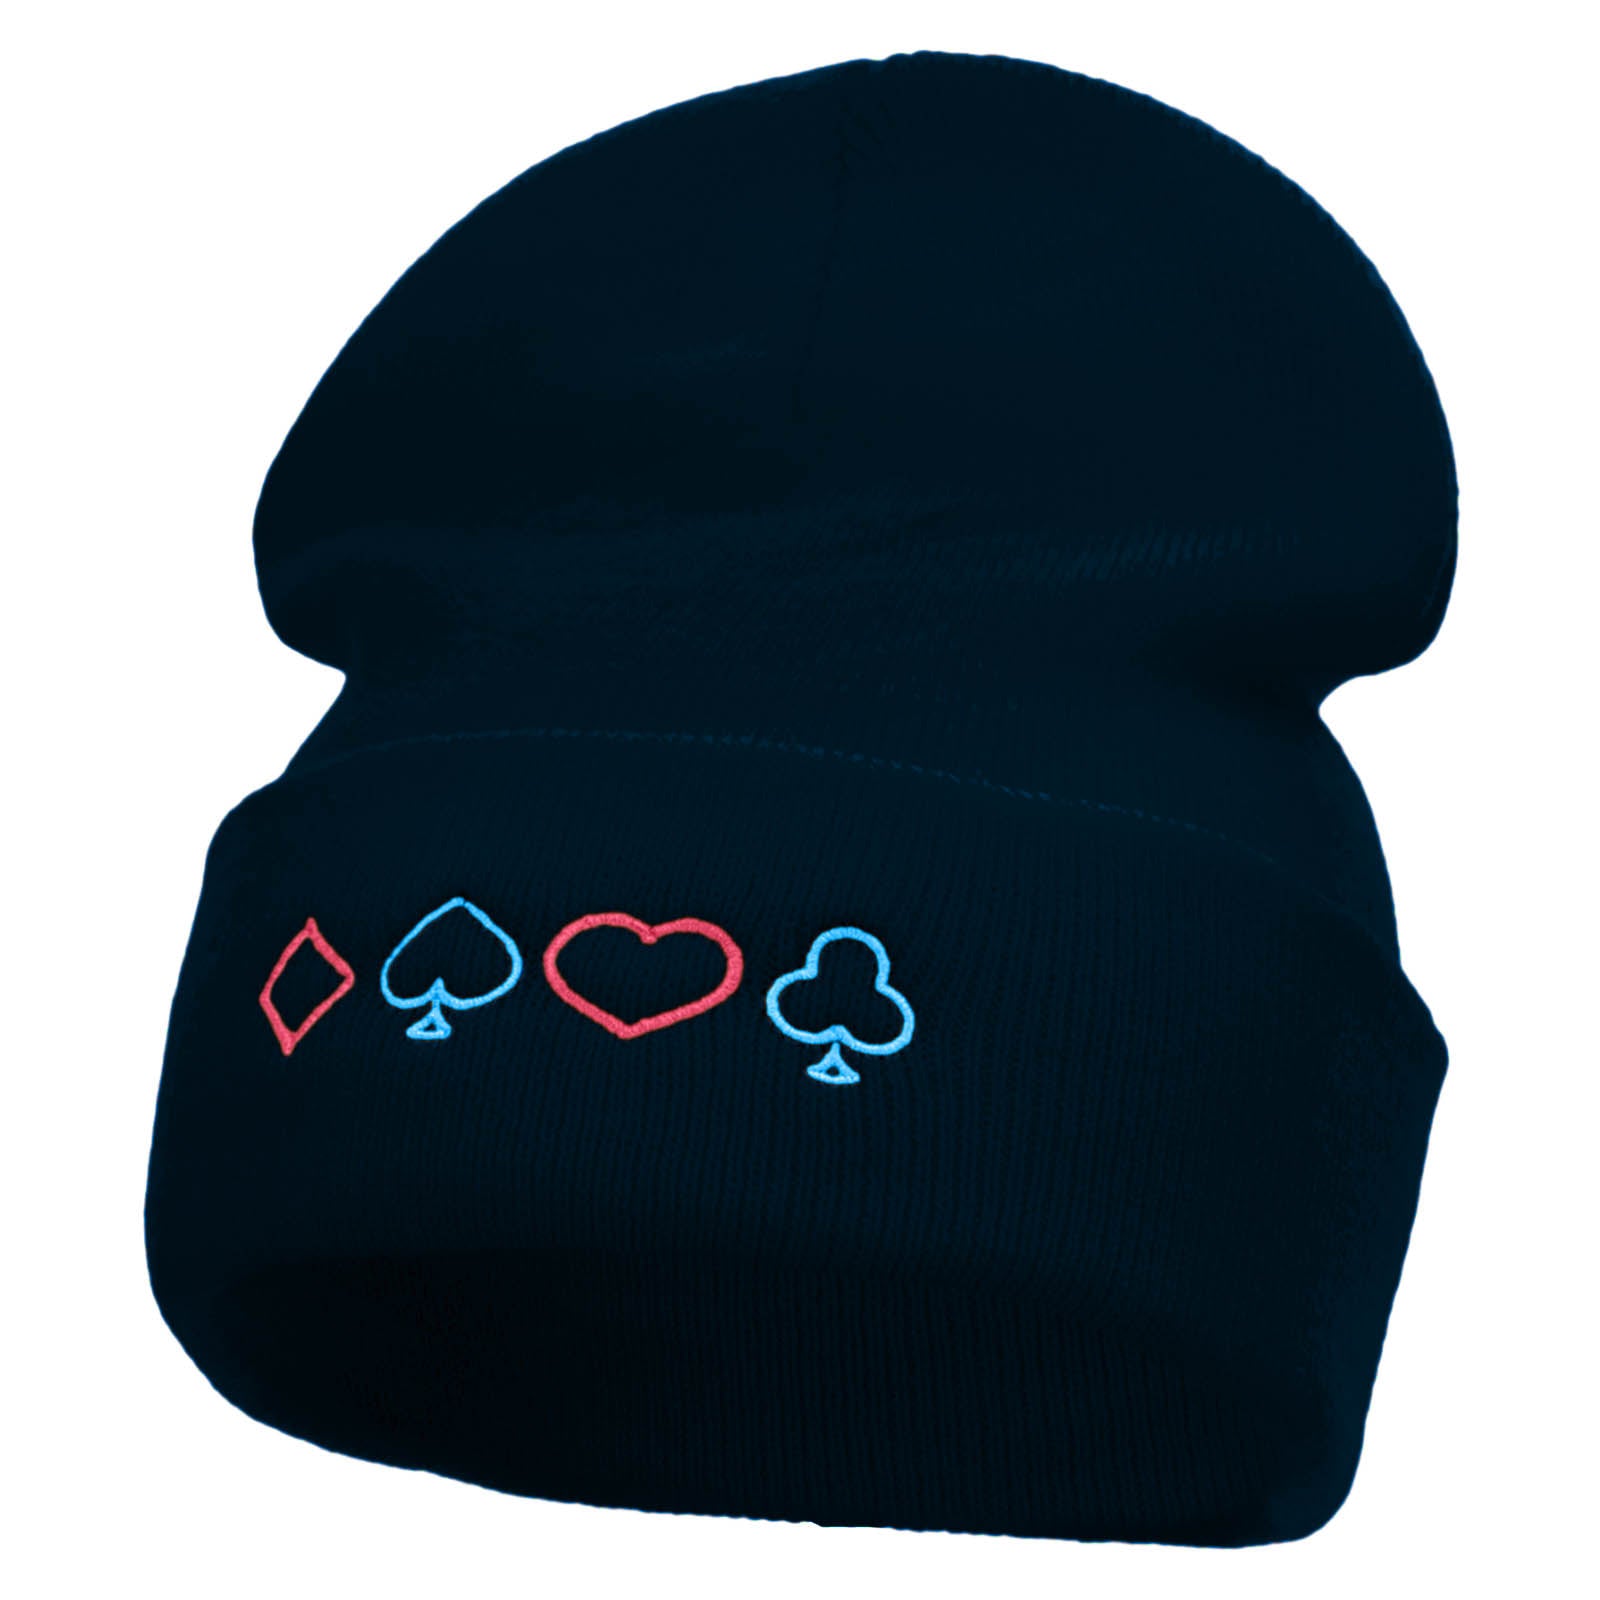 The Neon Card Suits Embroidered 12 Inch Long Knitted Beanie - Navy OSFM